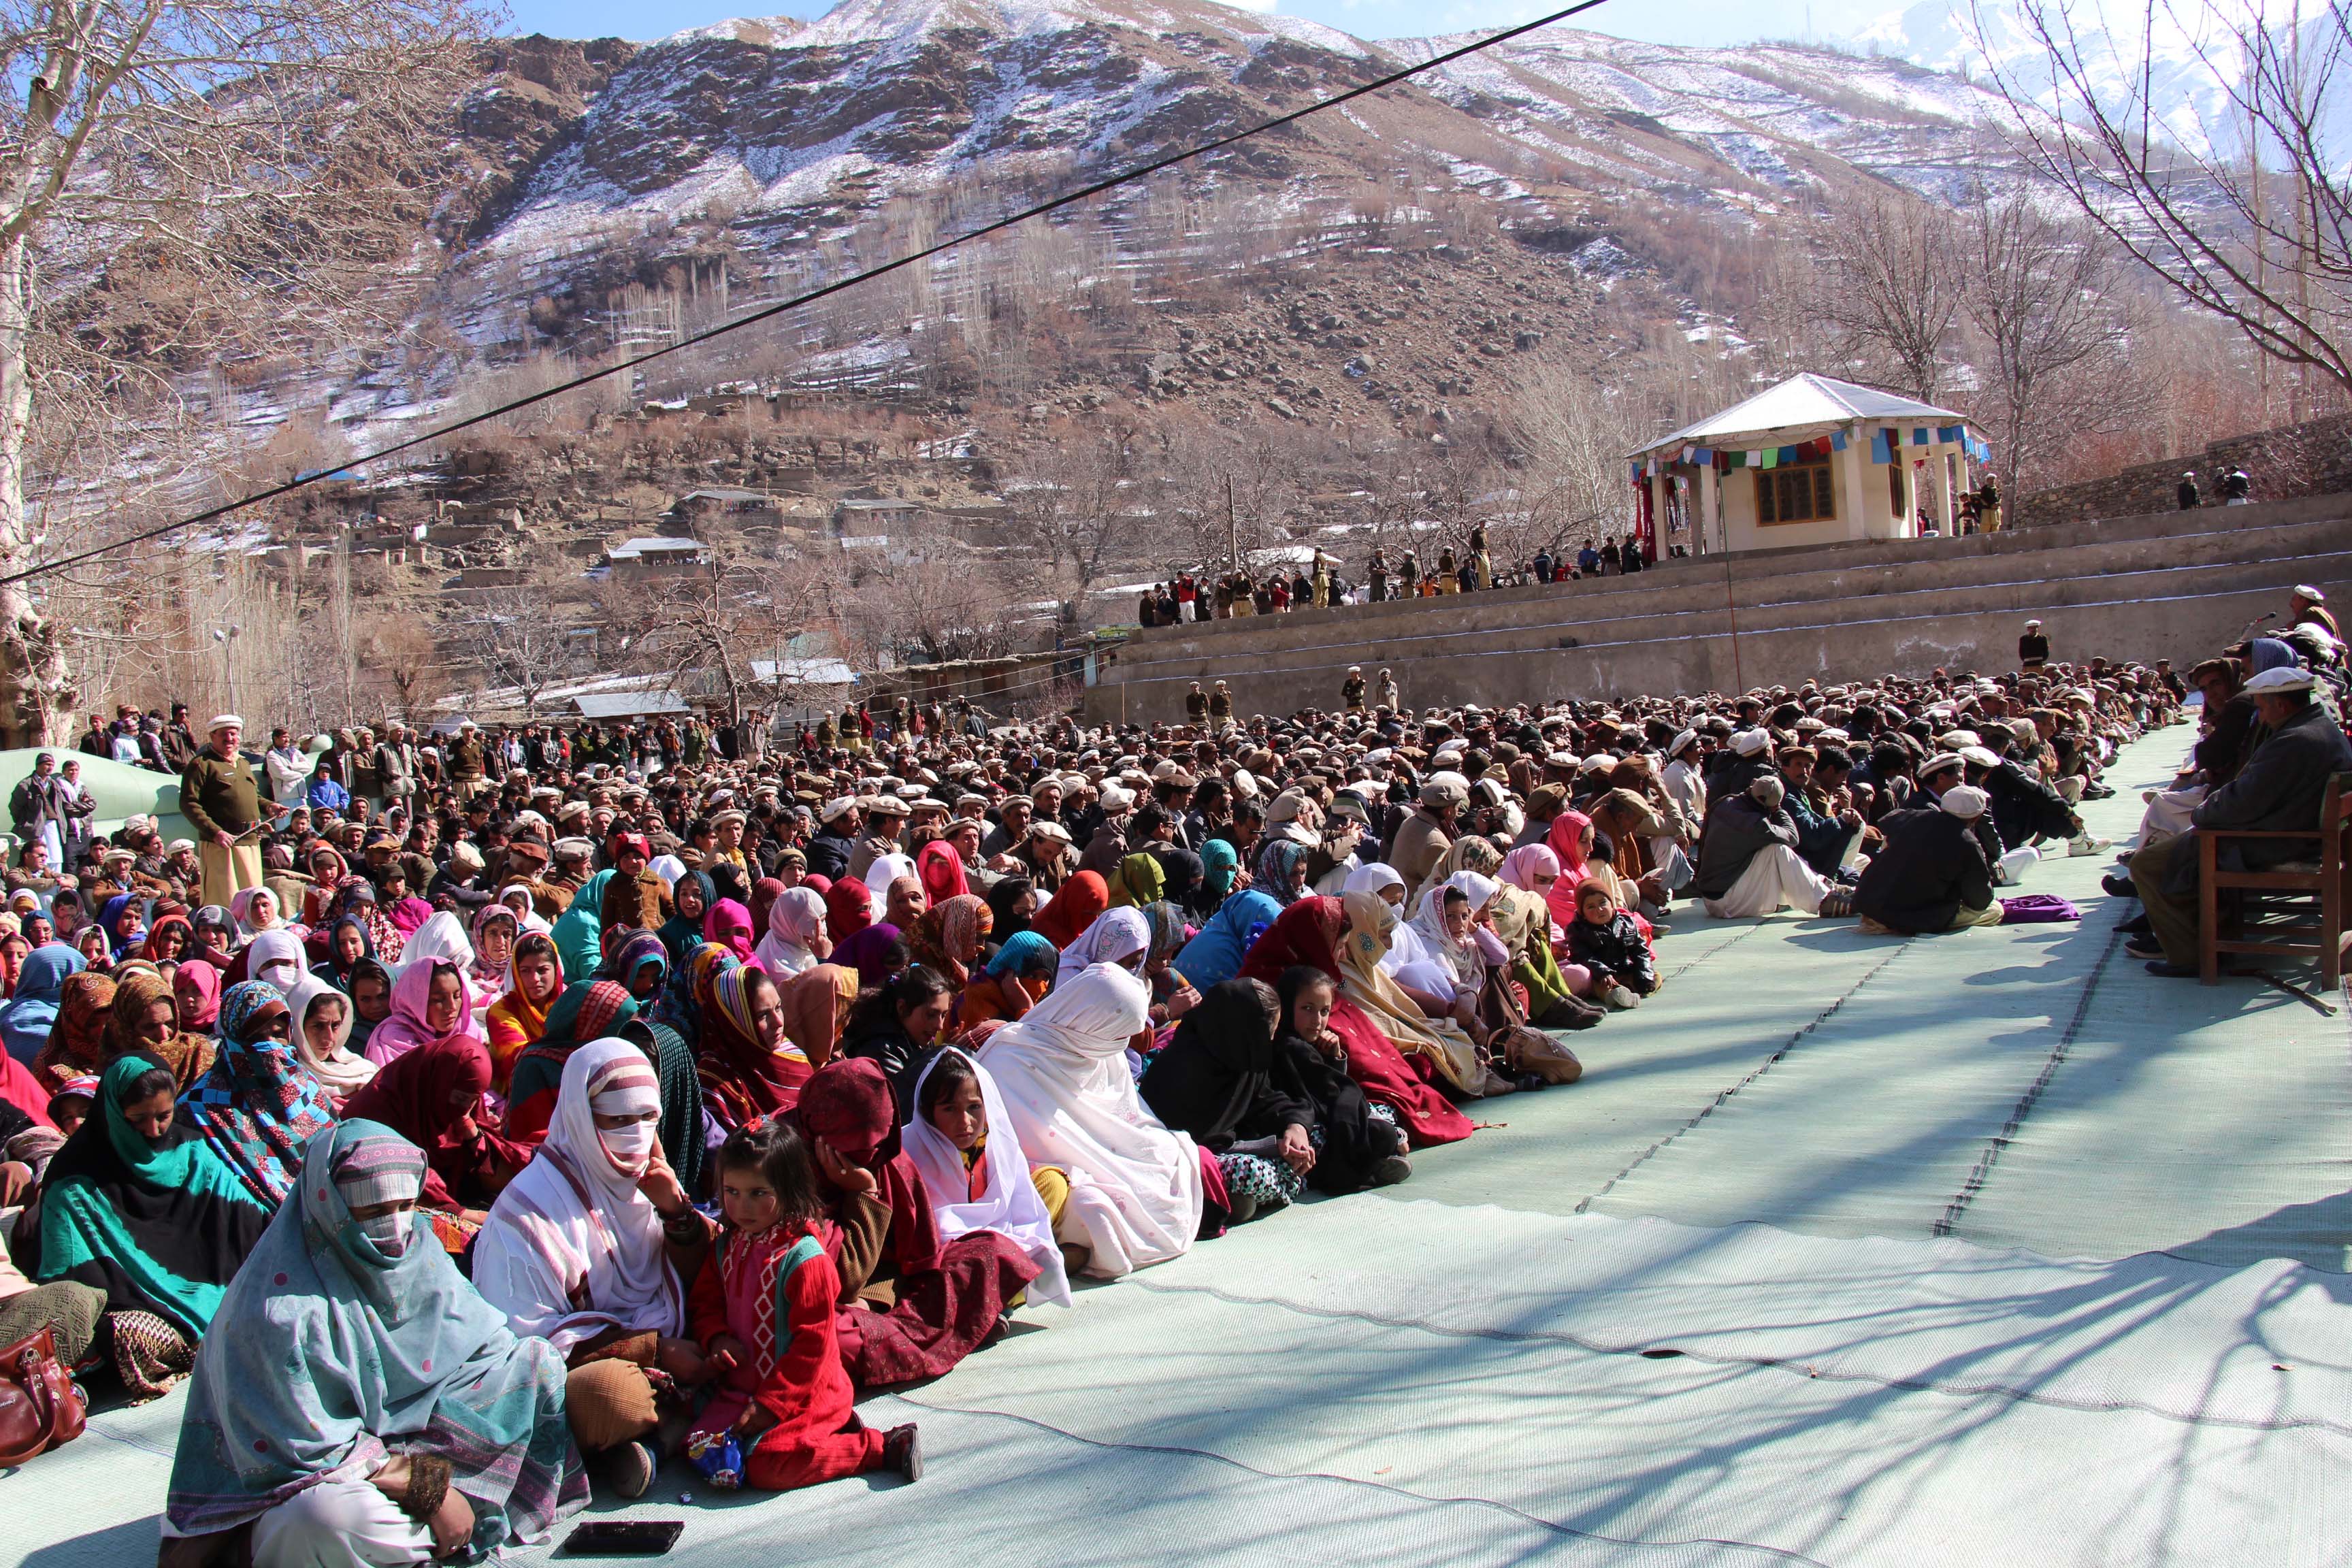 Thousands of women and men listen to the speakers as they highlight the teachings and life of Pir Nasir Khsuraw 